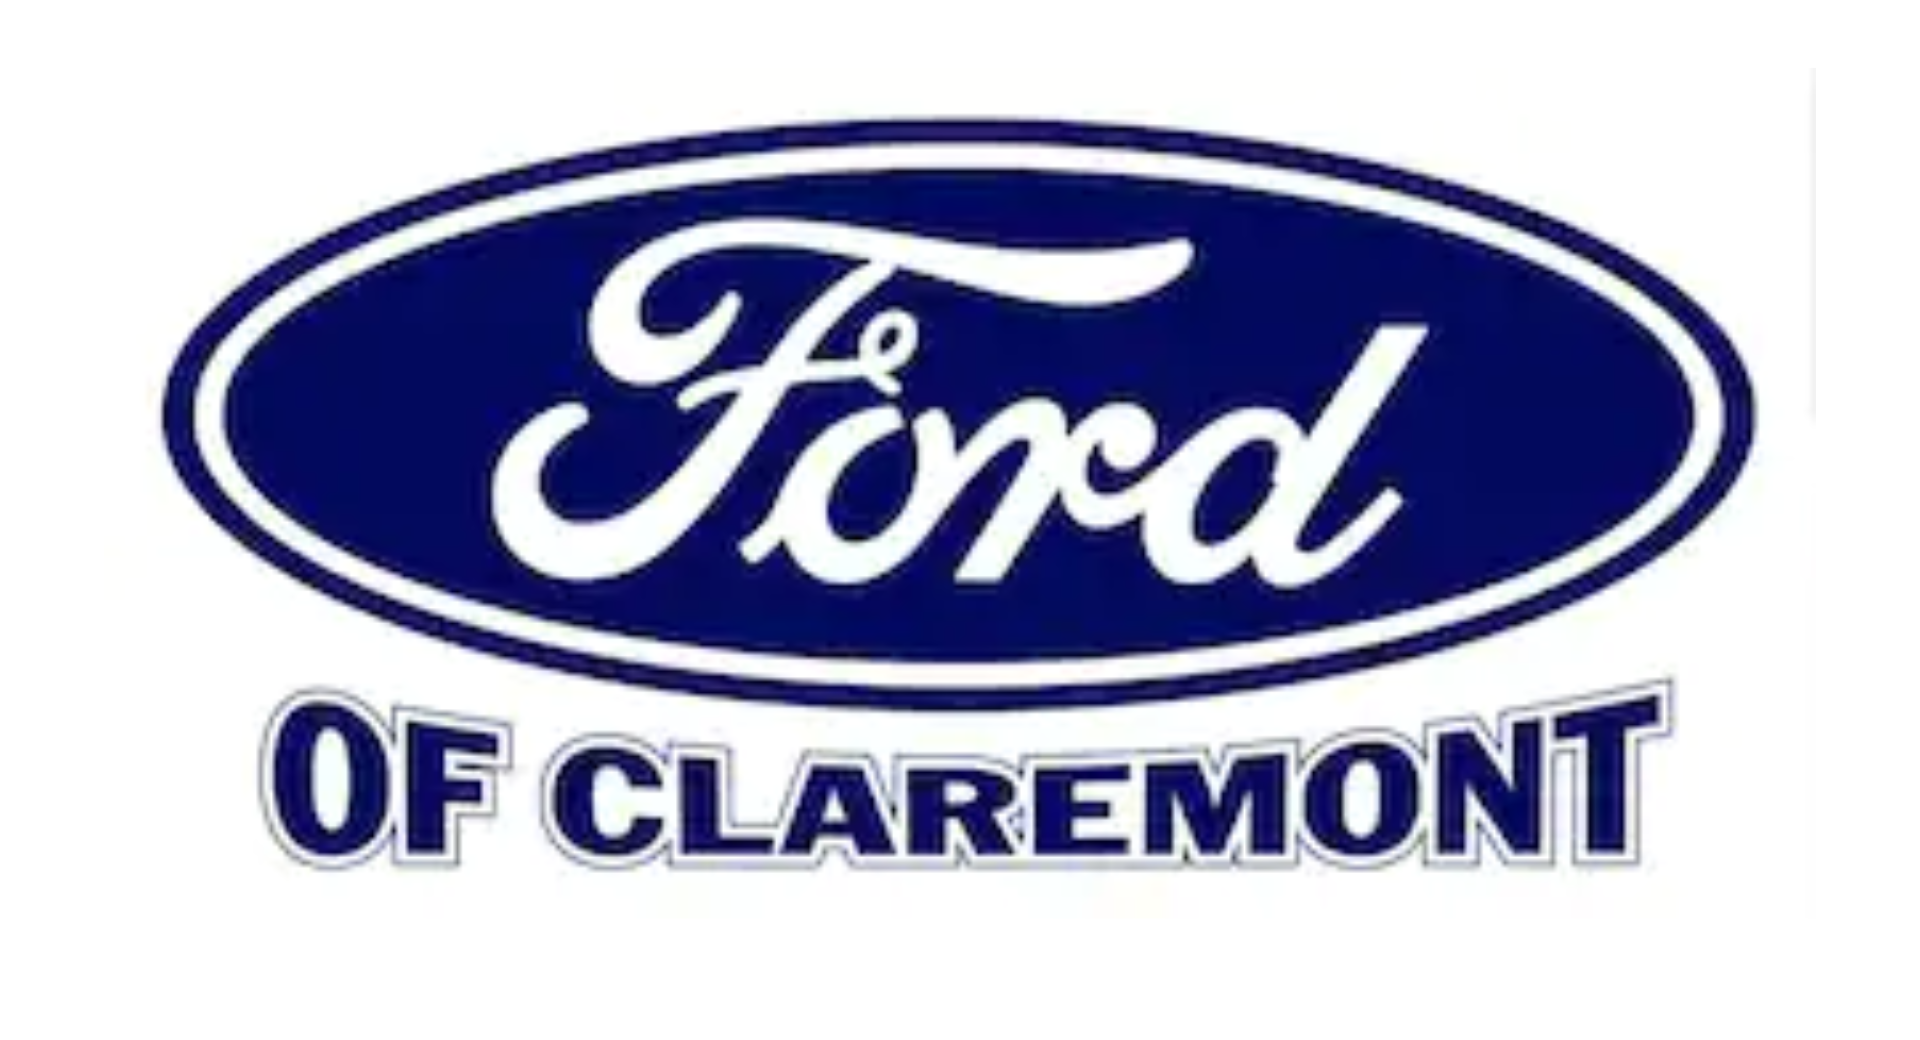 Ford of Claremont is a Certified Agriculture Dealership